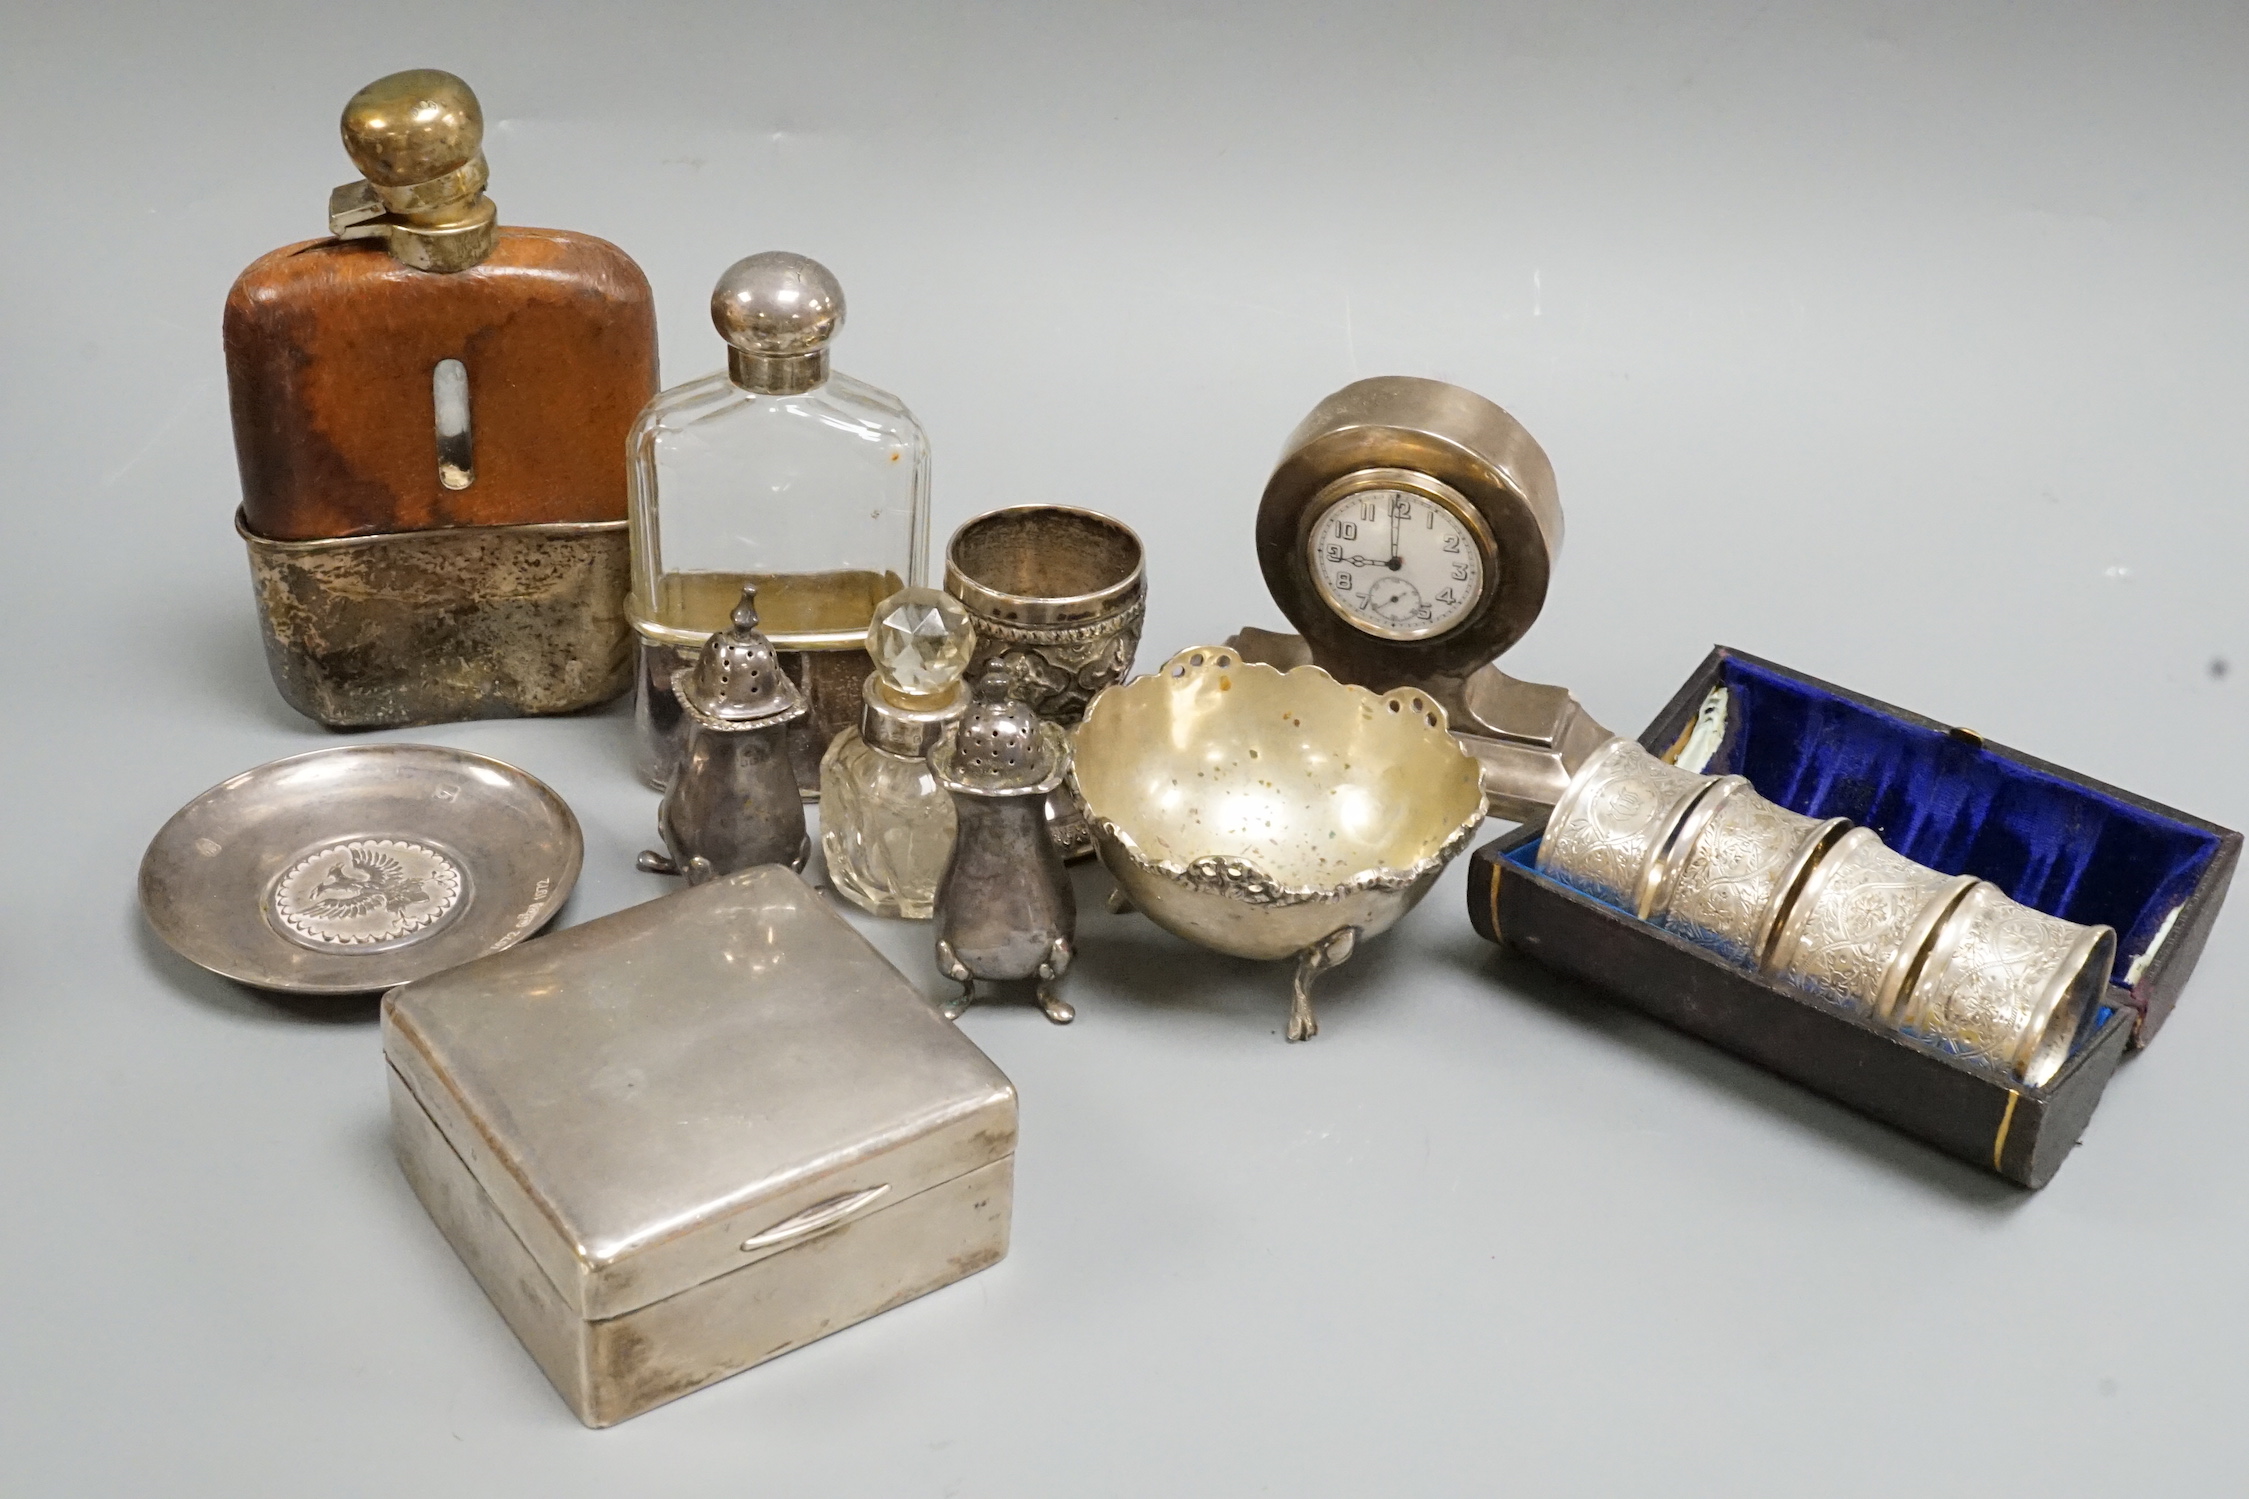 A George V silver mounted small mantel clock, height 93mm, a pair of silver pepperettes and eight other items including a silver mounted cigarette box, a cased set of four chased silver napkin rings and two plated hip fl